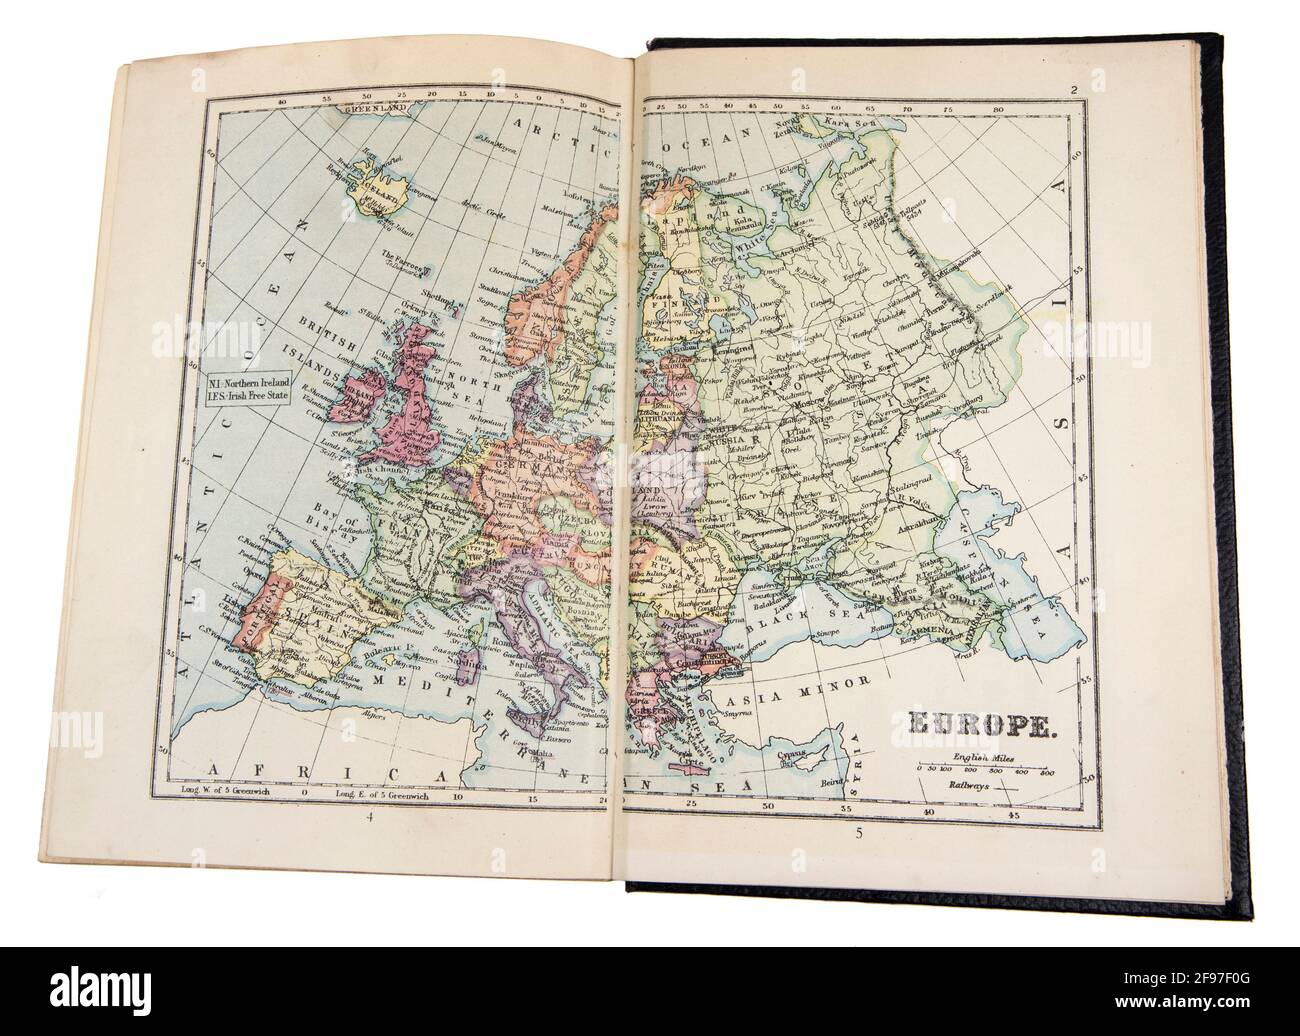 Map of Europe in the The New Standard Encyclopaedia and World Atlas, published by Odhams in 1932 Stock Photo